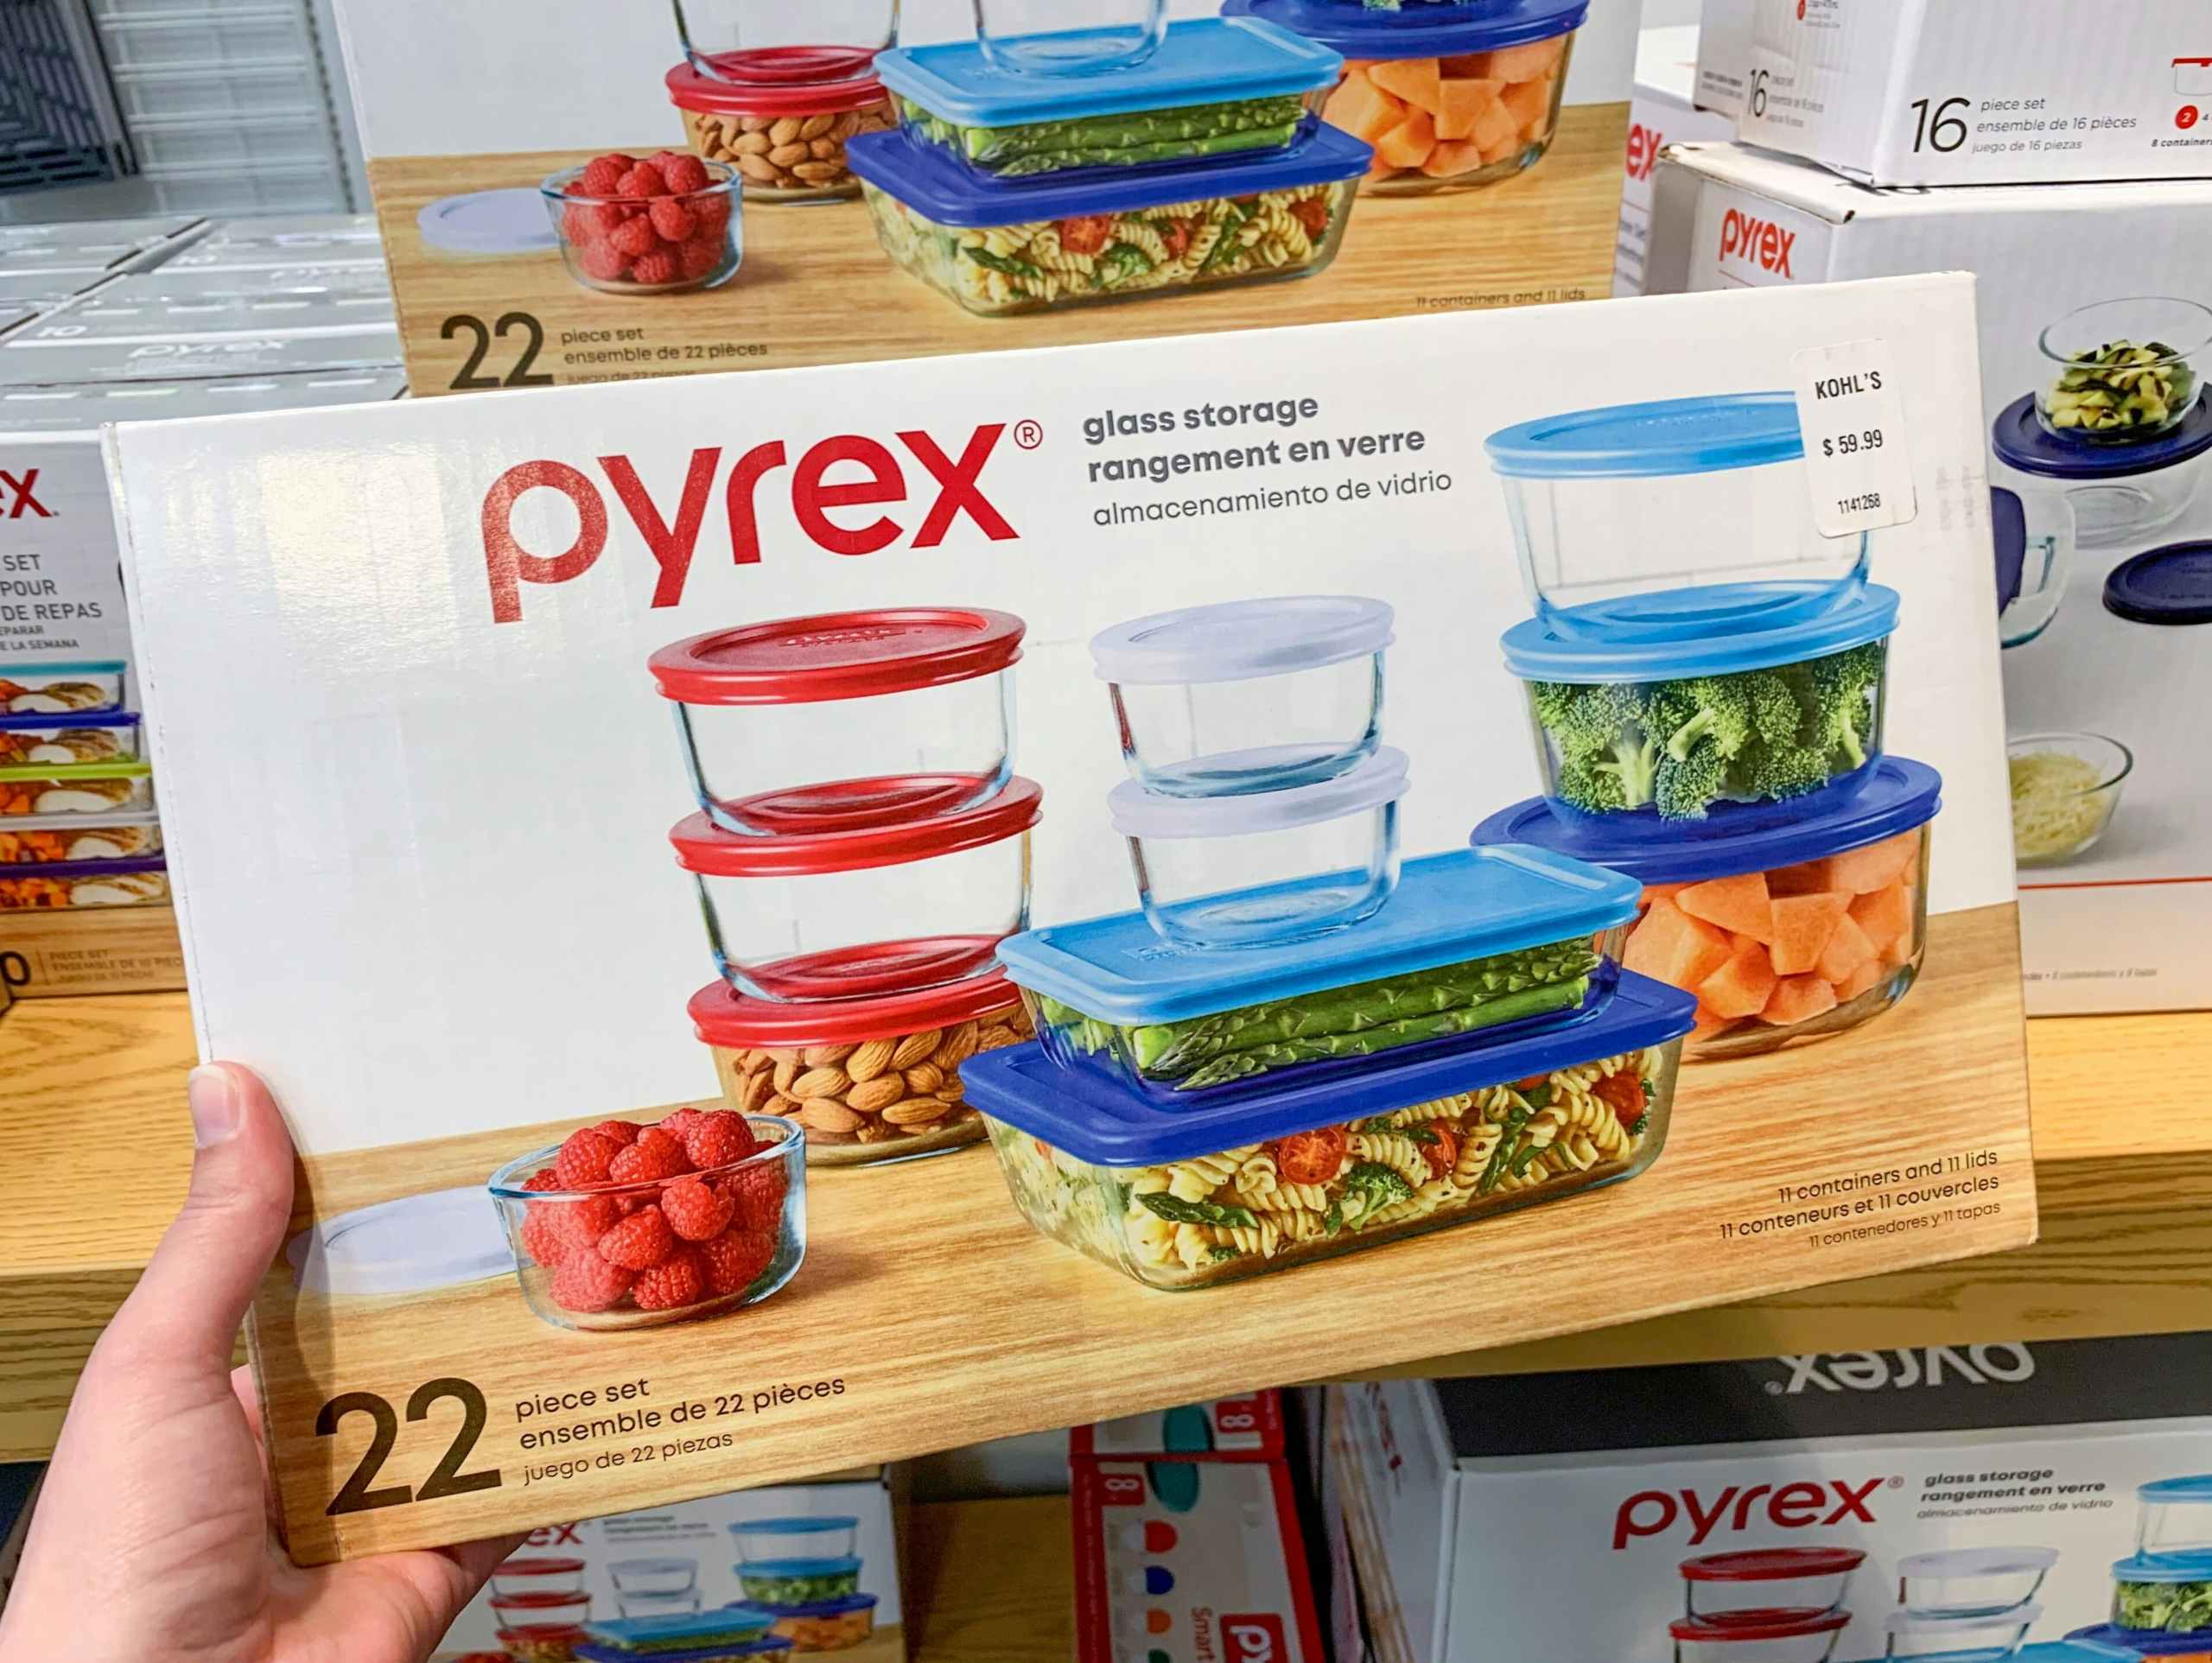 one pyrex box being held off the shelf